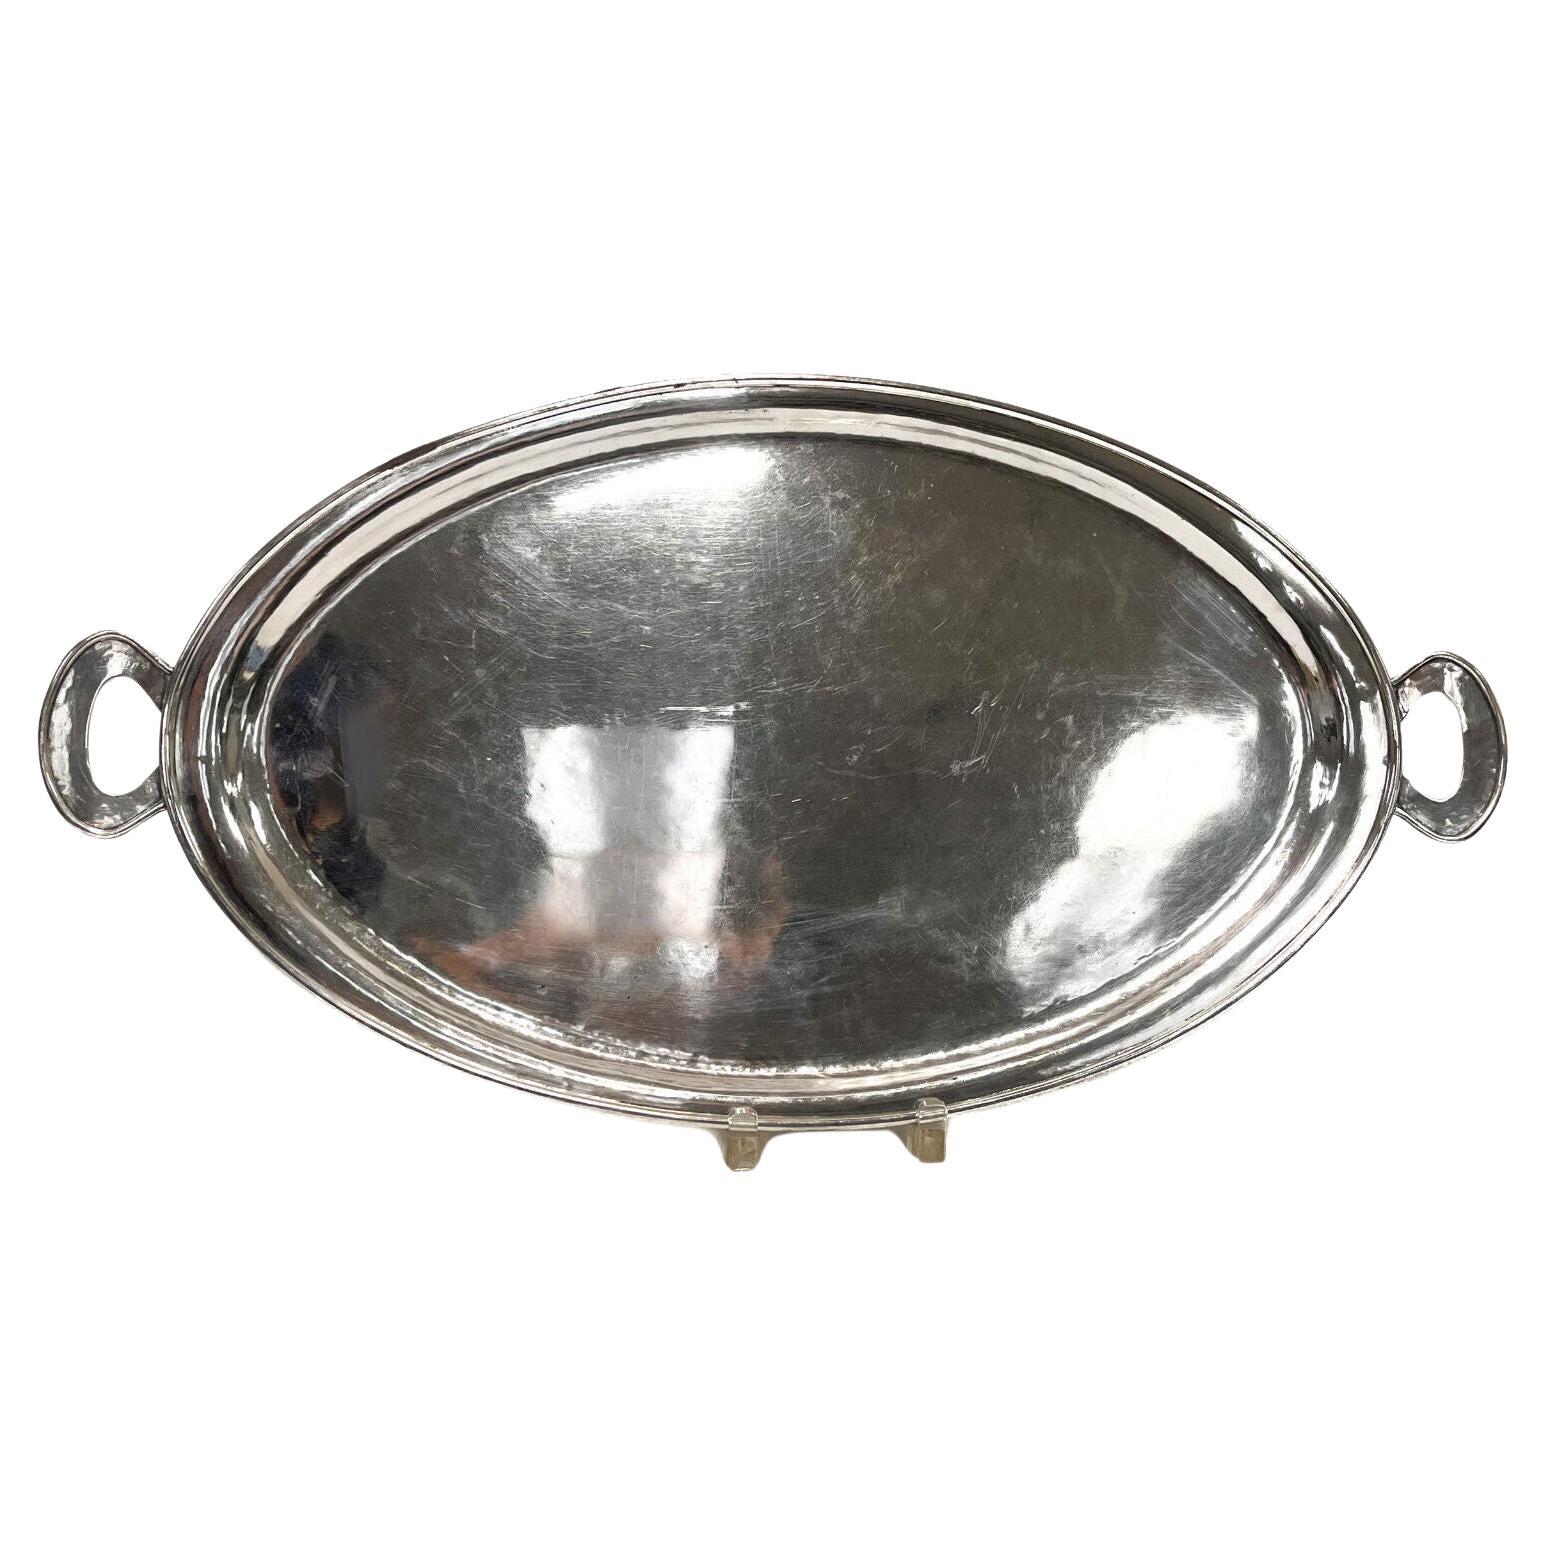  The Kalo Shops Sterling Silver Hand Wrought Handled Oval Serving Tray #208 c191